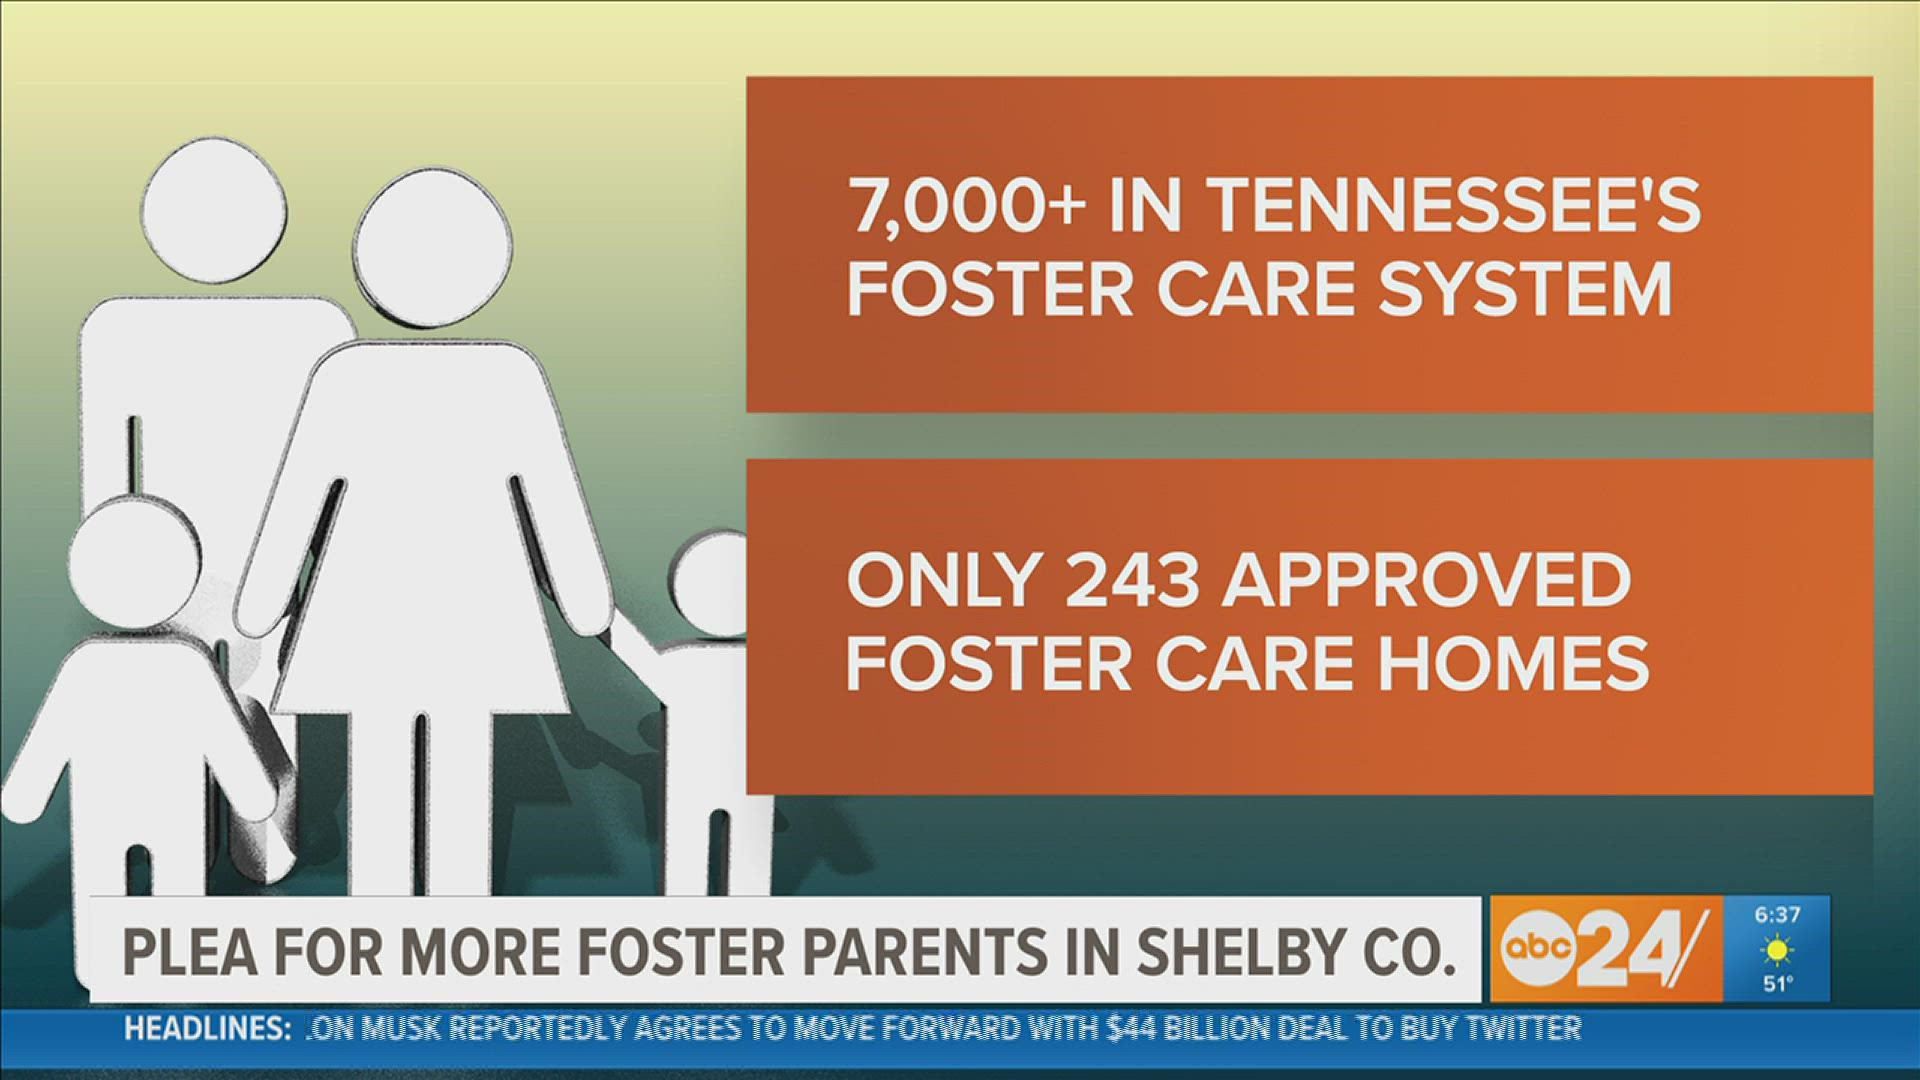 Right now, there are more than 7,000 children in Tennessee's foster care system, but only 243 approved foster homes